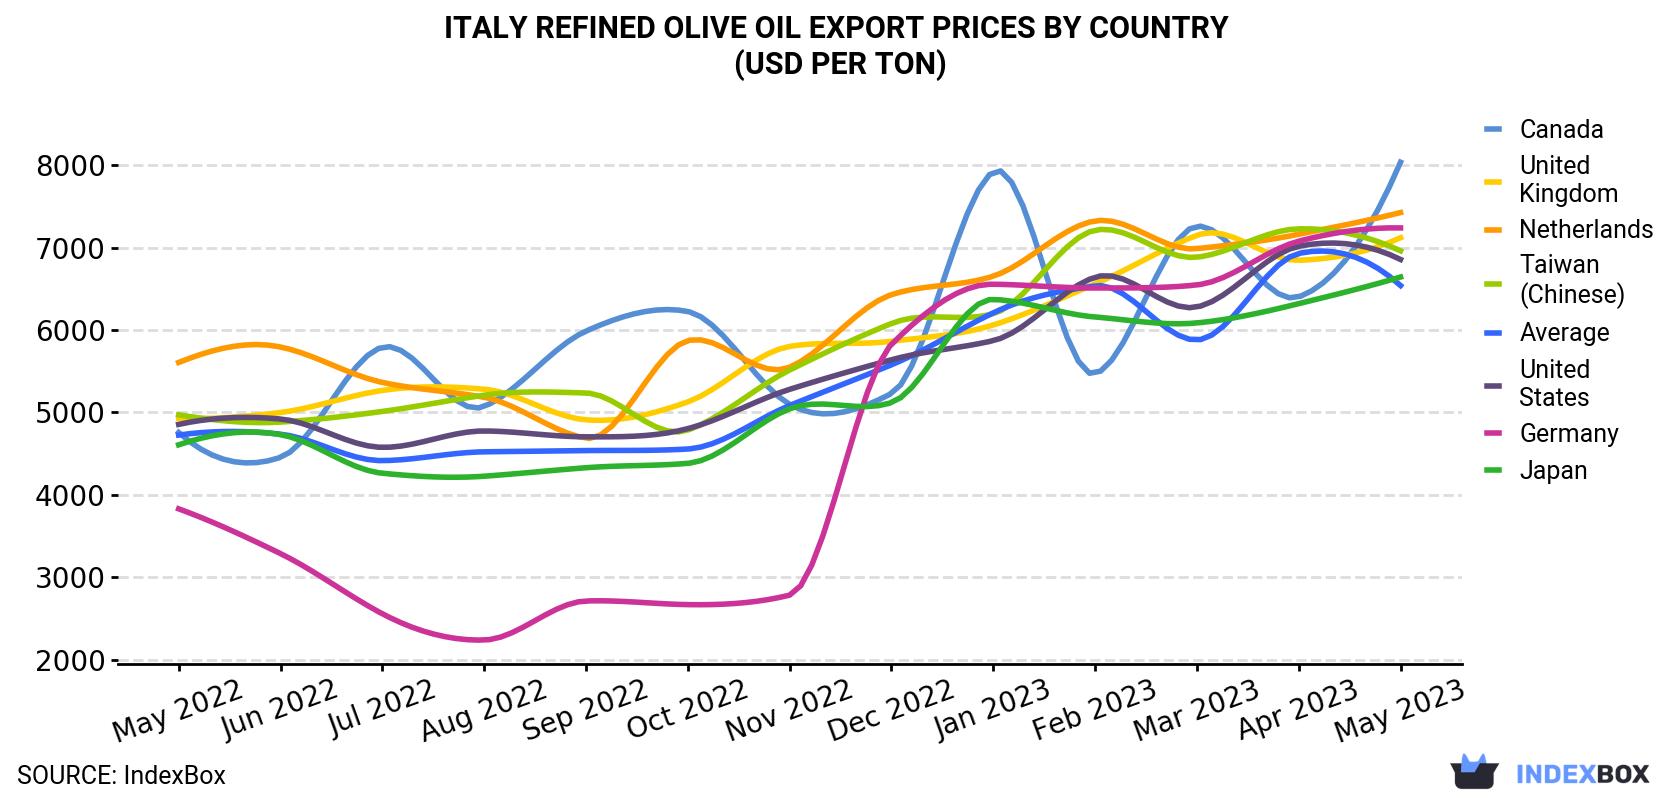 Italy Refined Olive Oil Export Prices By Country (USD Per Ton)